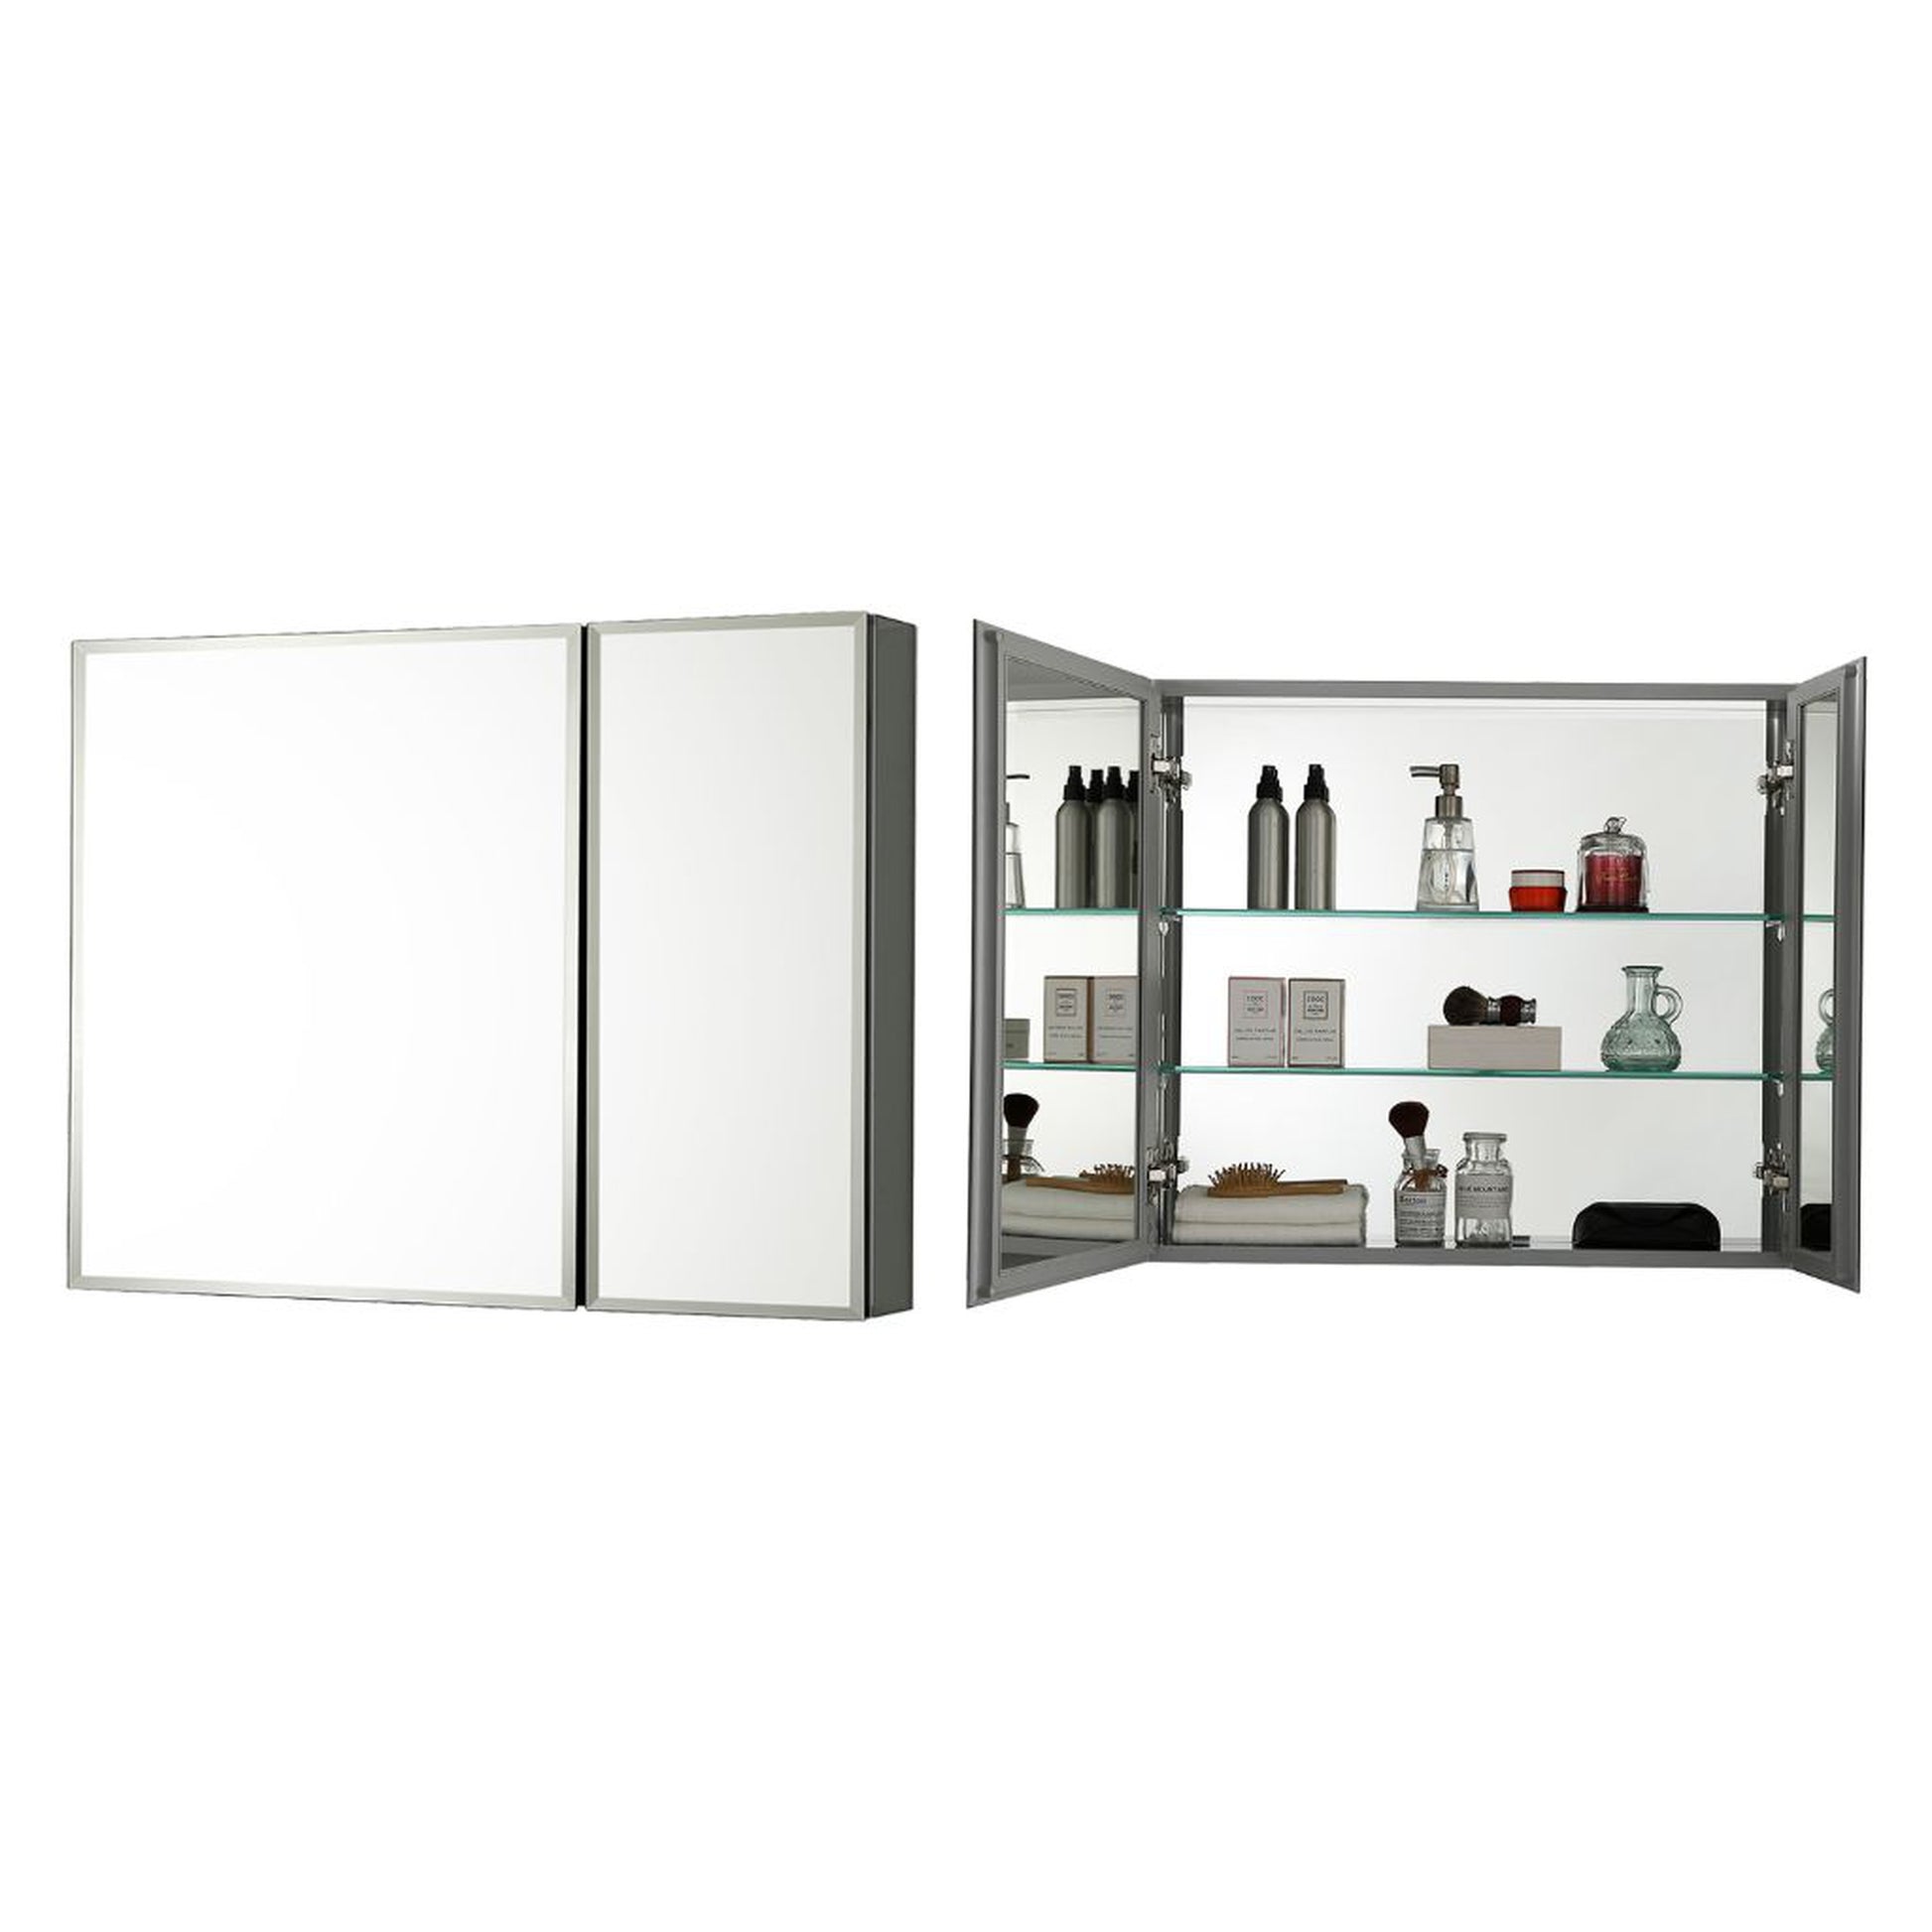 Oval Wall Mounted Medicine Cabinet Brushed Stainless Steel Bathroom Storage  Cabinet w/Mirror 26 x 18 Hanging Double Shelf Renovators Supply